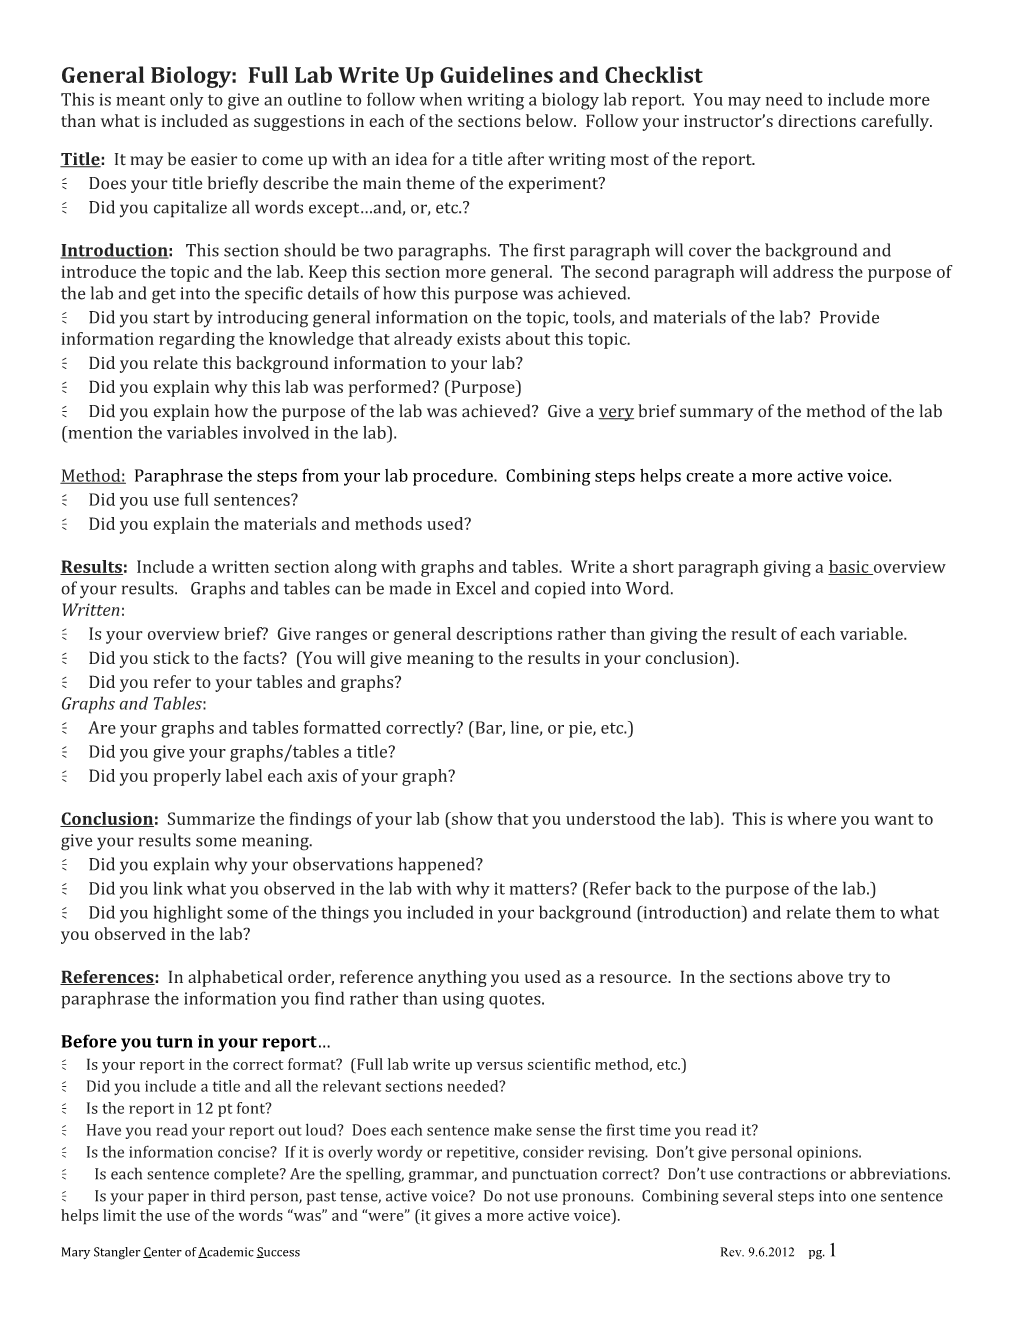 General Biology: Full Lab Write up Guidelines and Checklist